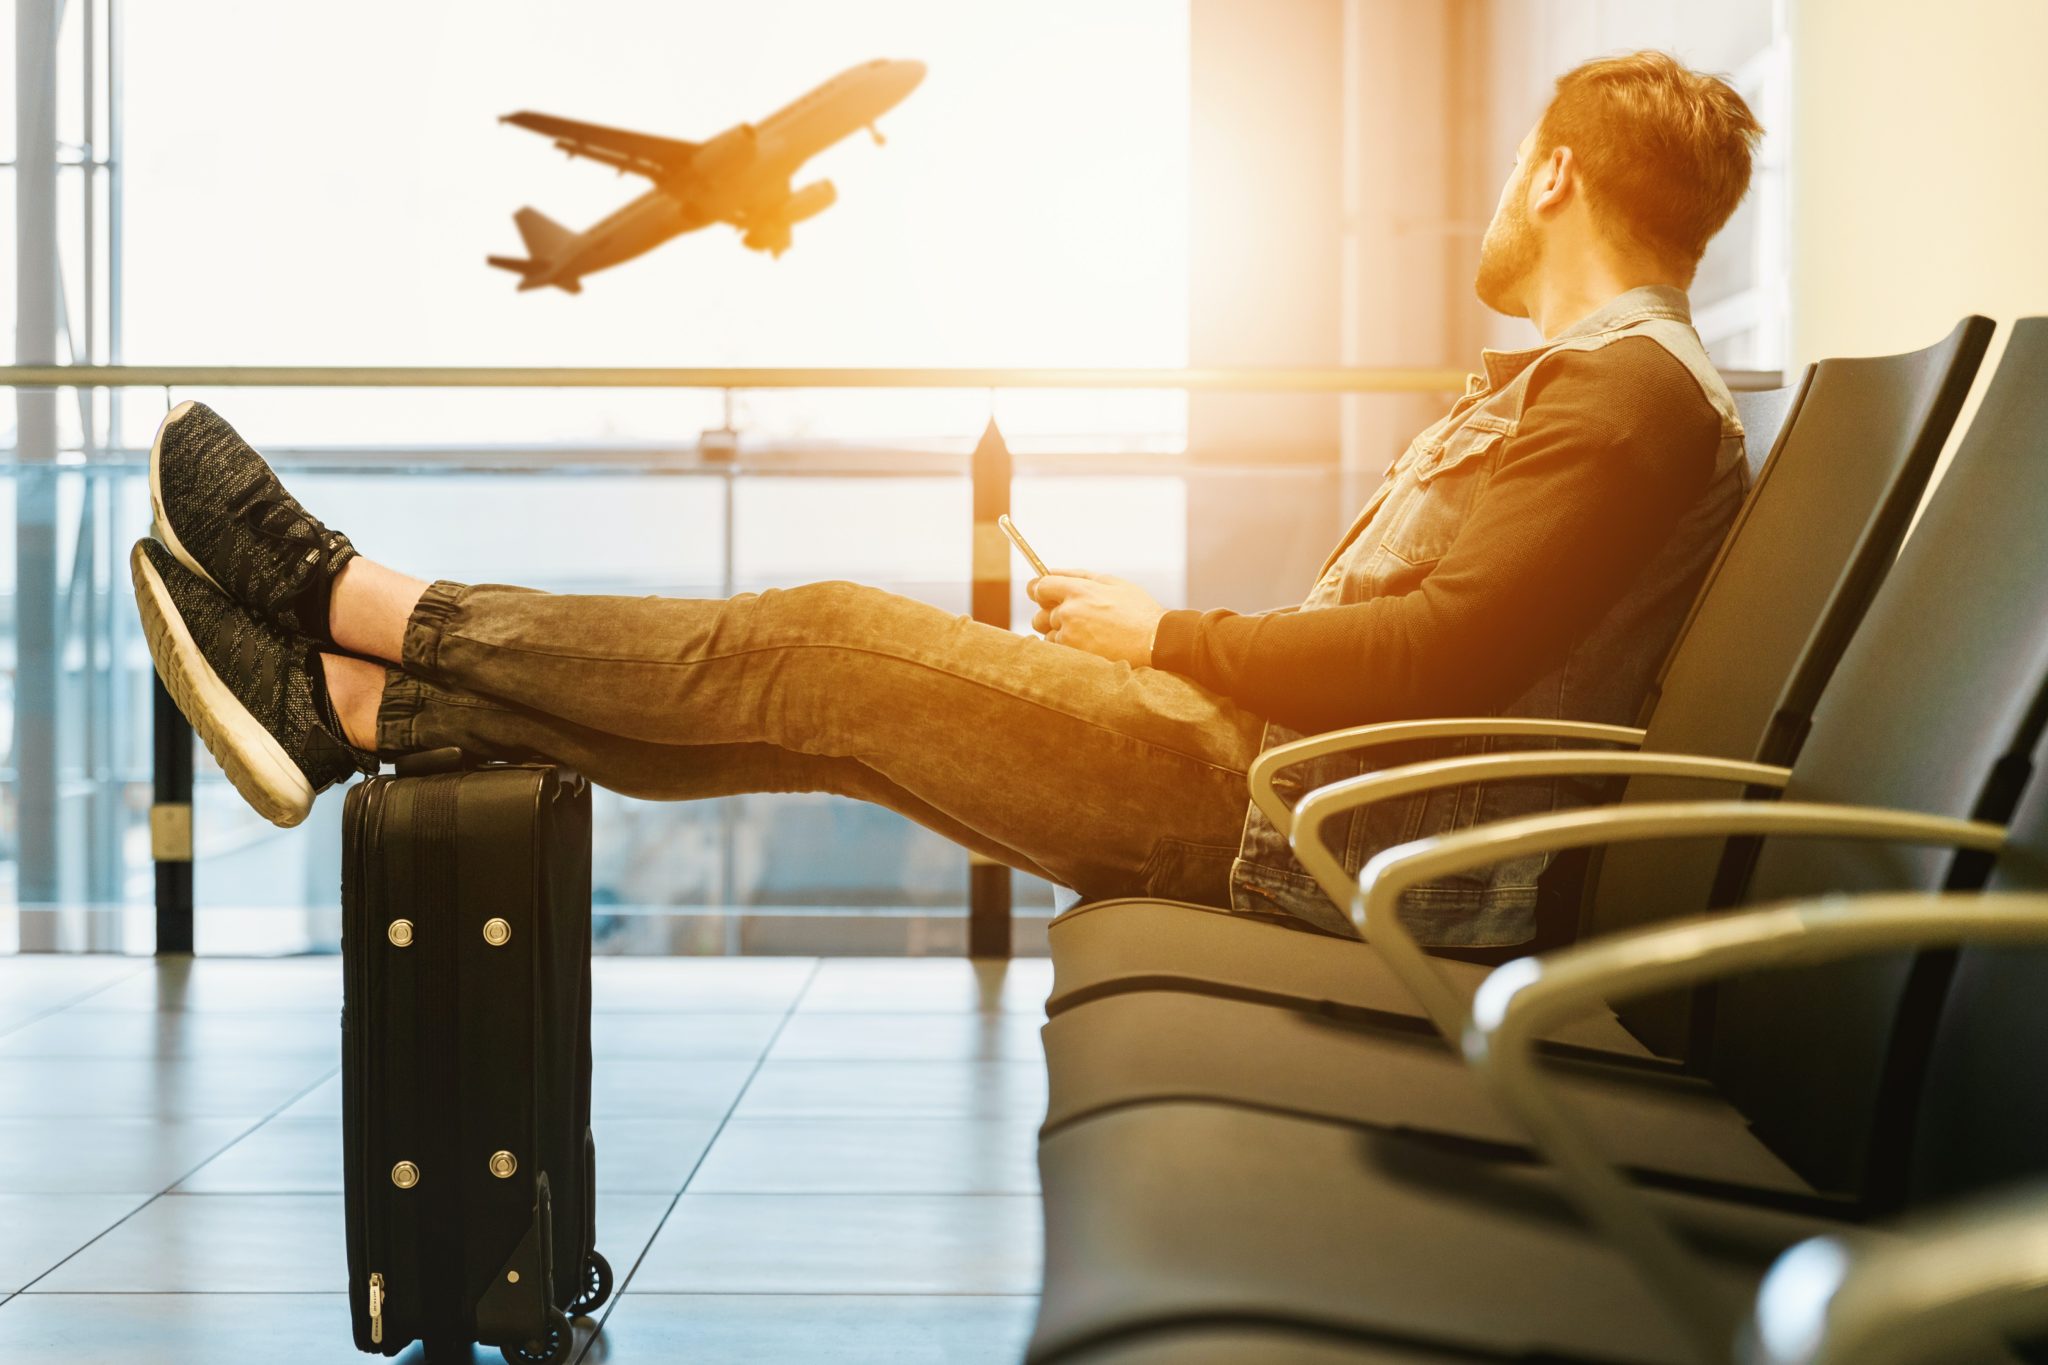 How COVID-19 Could Change How Business Travel Is Handled In The Future